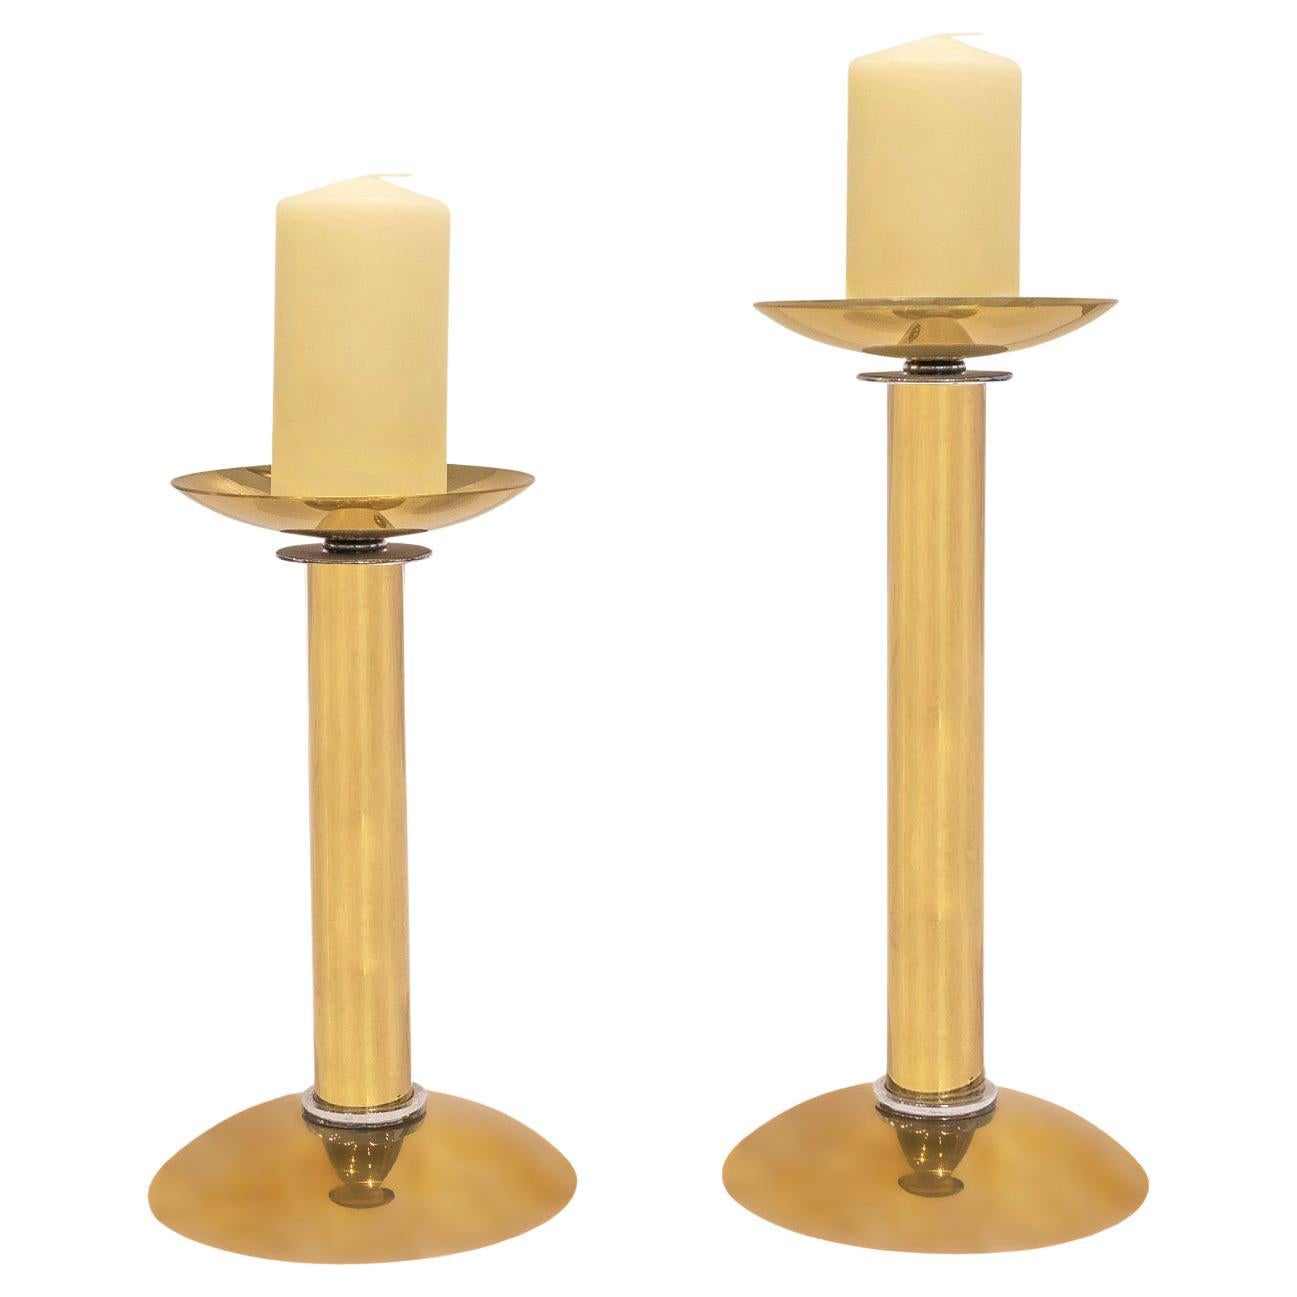 Karl Springer Pair of Candle Holders in Brass with Chrome Accents, 1980s For Sale